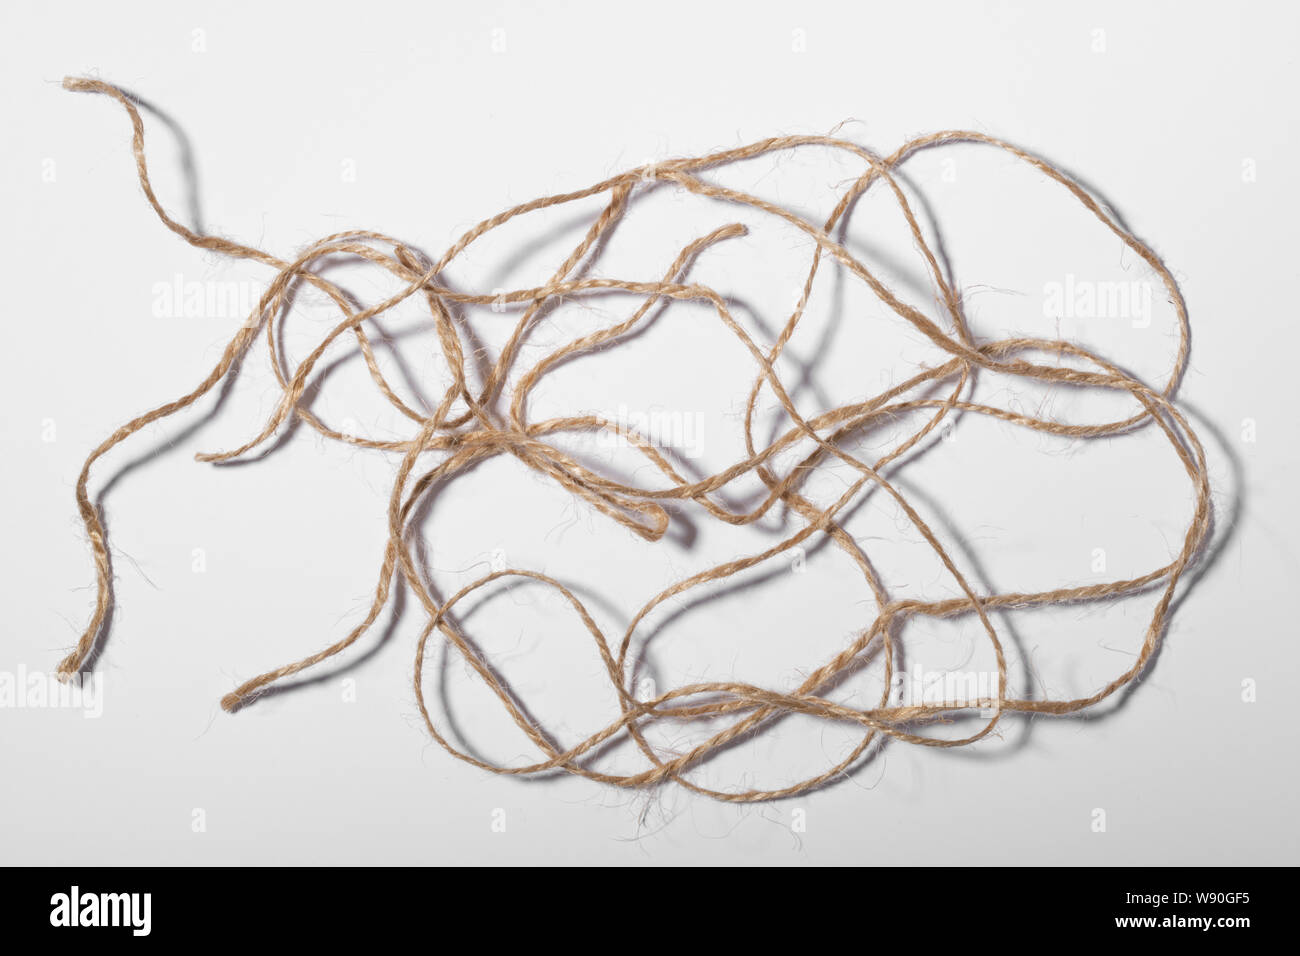 Several pieces of brown string on a white background Stock Photo - Alamy